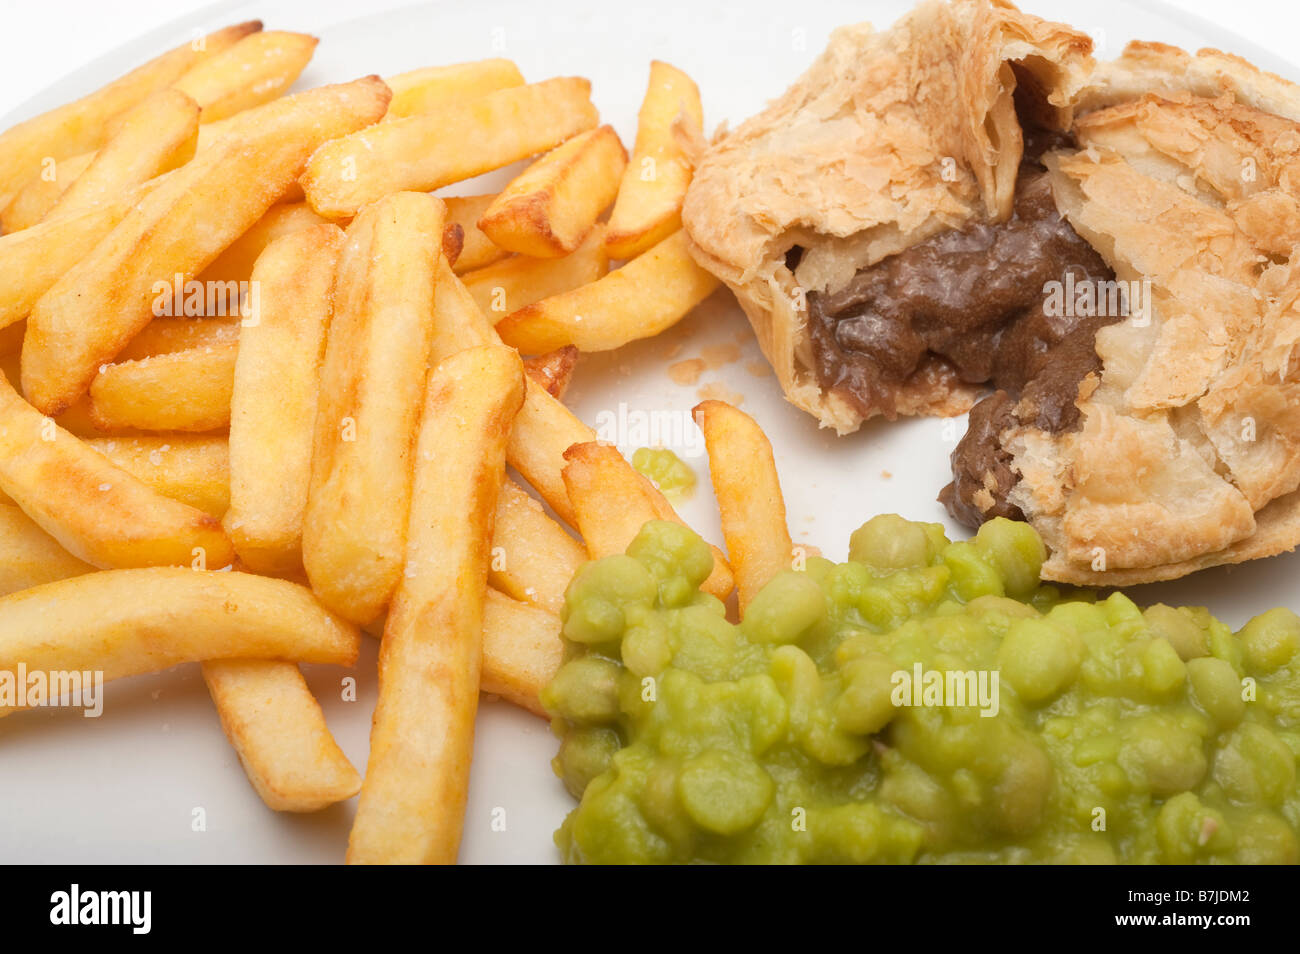 Chips meat pie and mushy peas Stock Photo